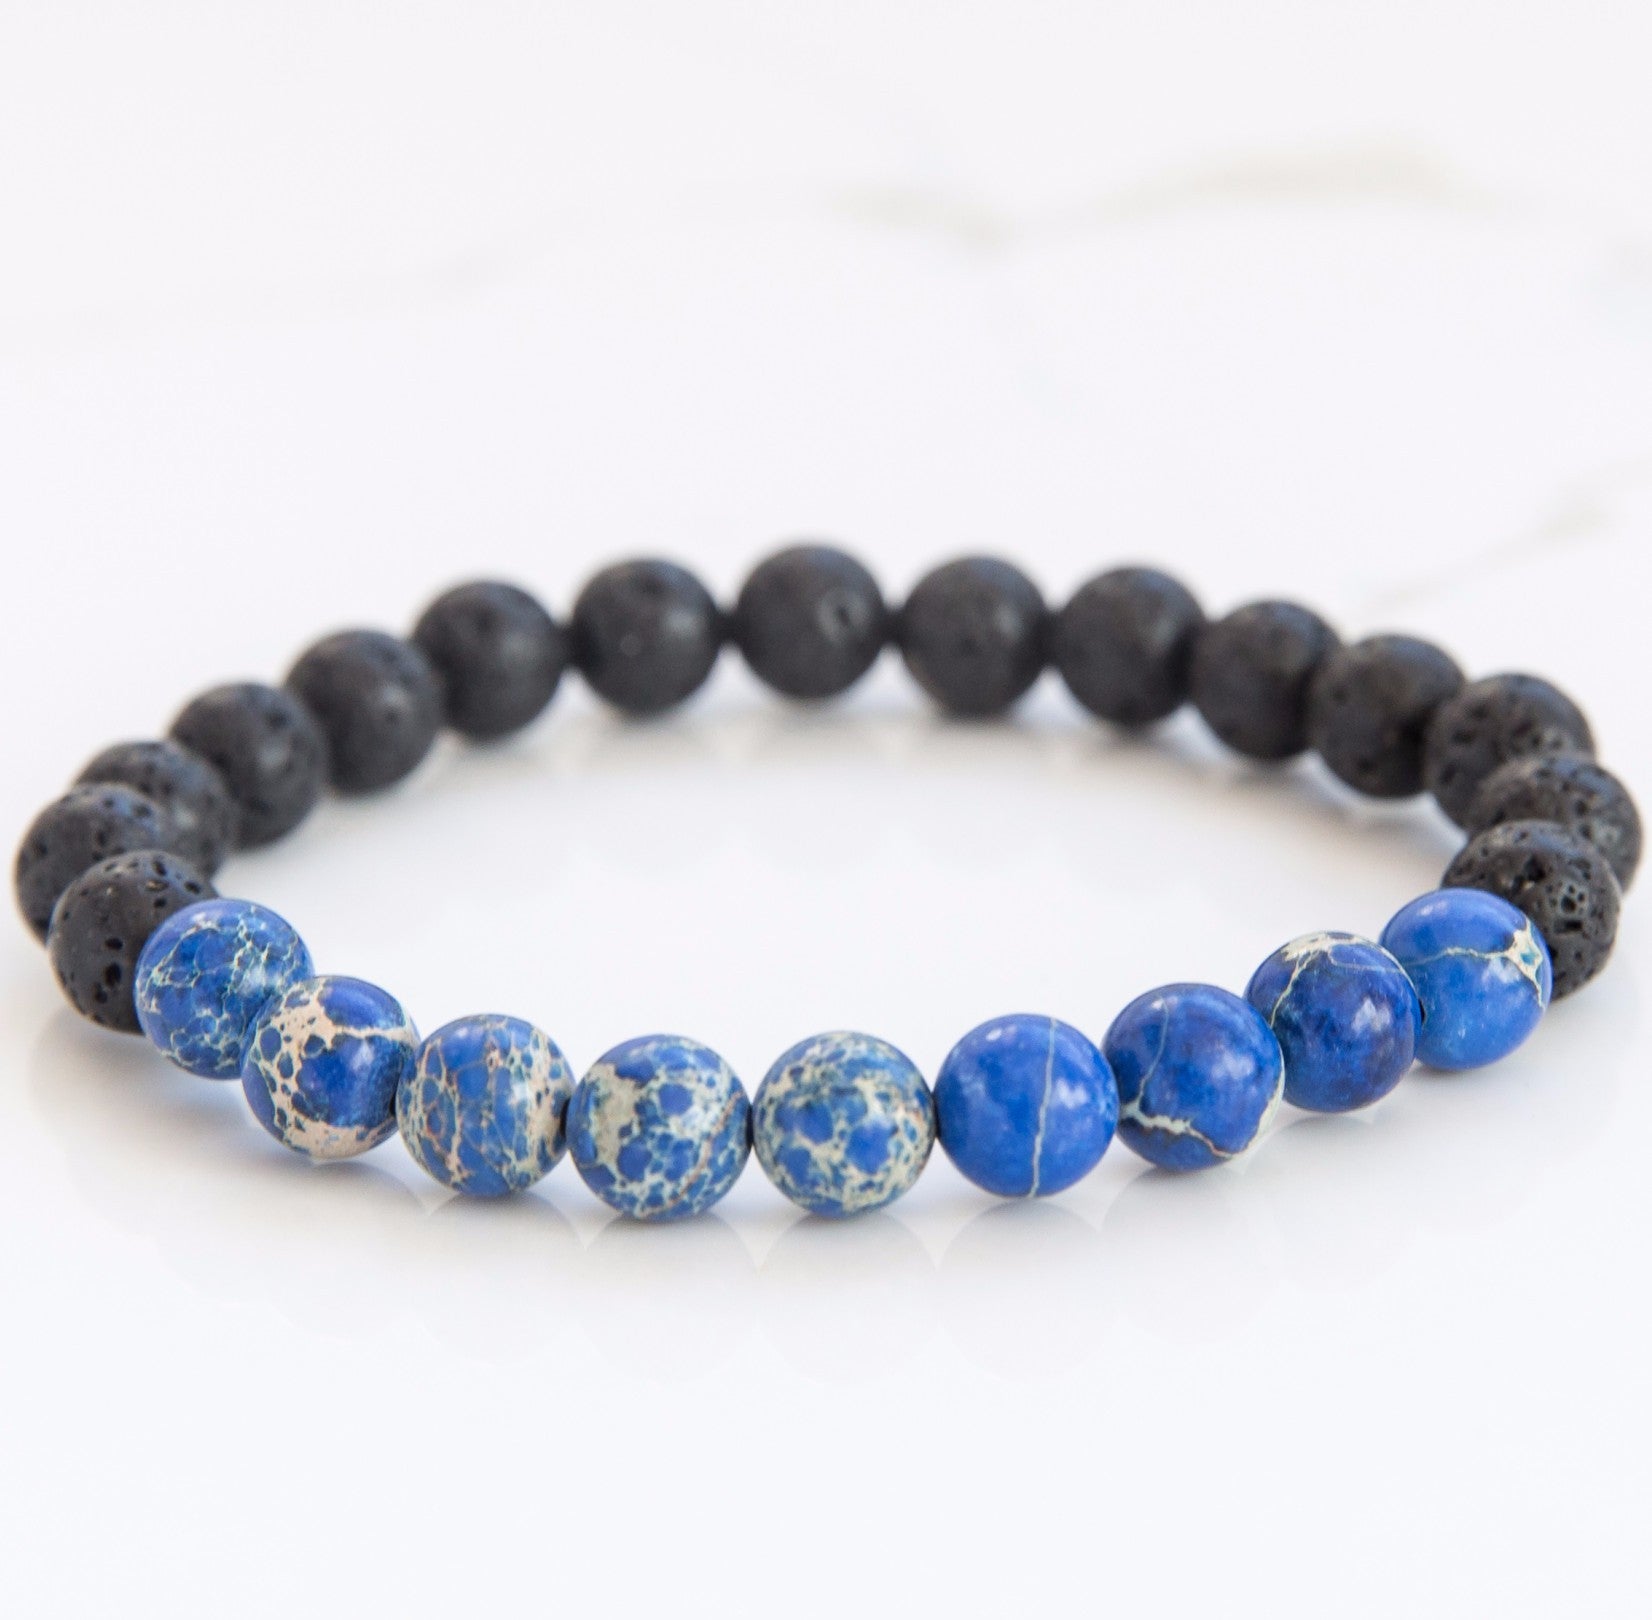 Blue Imperial Jasper & Lava Stone diffusing bracelet for essential oil aromatherapy jewelery